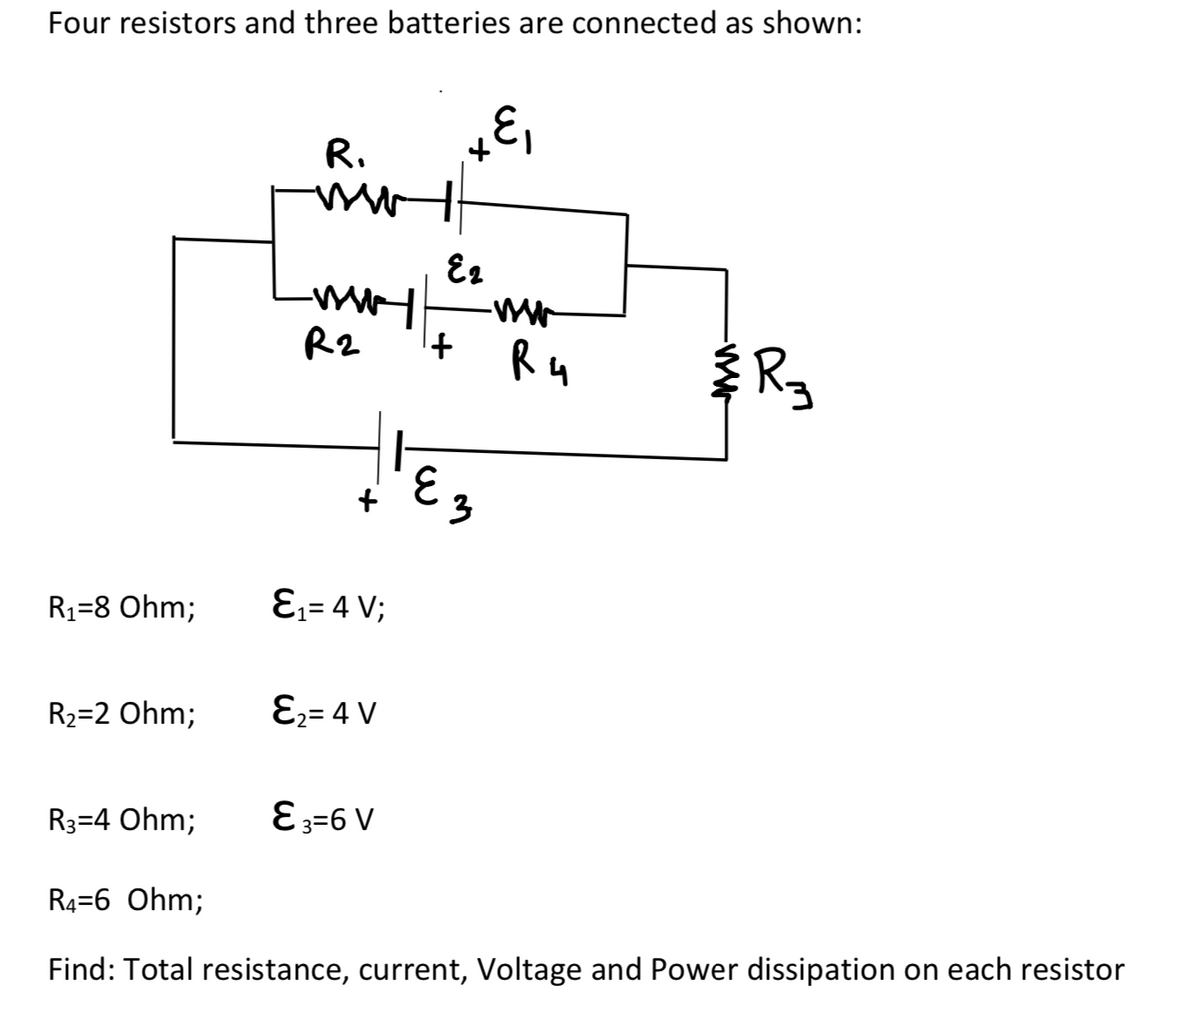 Four resistors and three batteries are connected as shown:
R.
R2
R4
E3
R1=8 Ohm;
Ɛ;= 4 V;
R2=2 Ohm;
E;= 4 V
R3=4 Ohm;
E3=6 V
R4=6 Ohm;
Find: Total resistance, current, Voltage and Power dissipation on each resistor
R.
